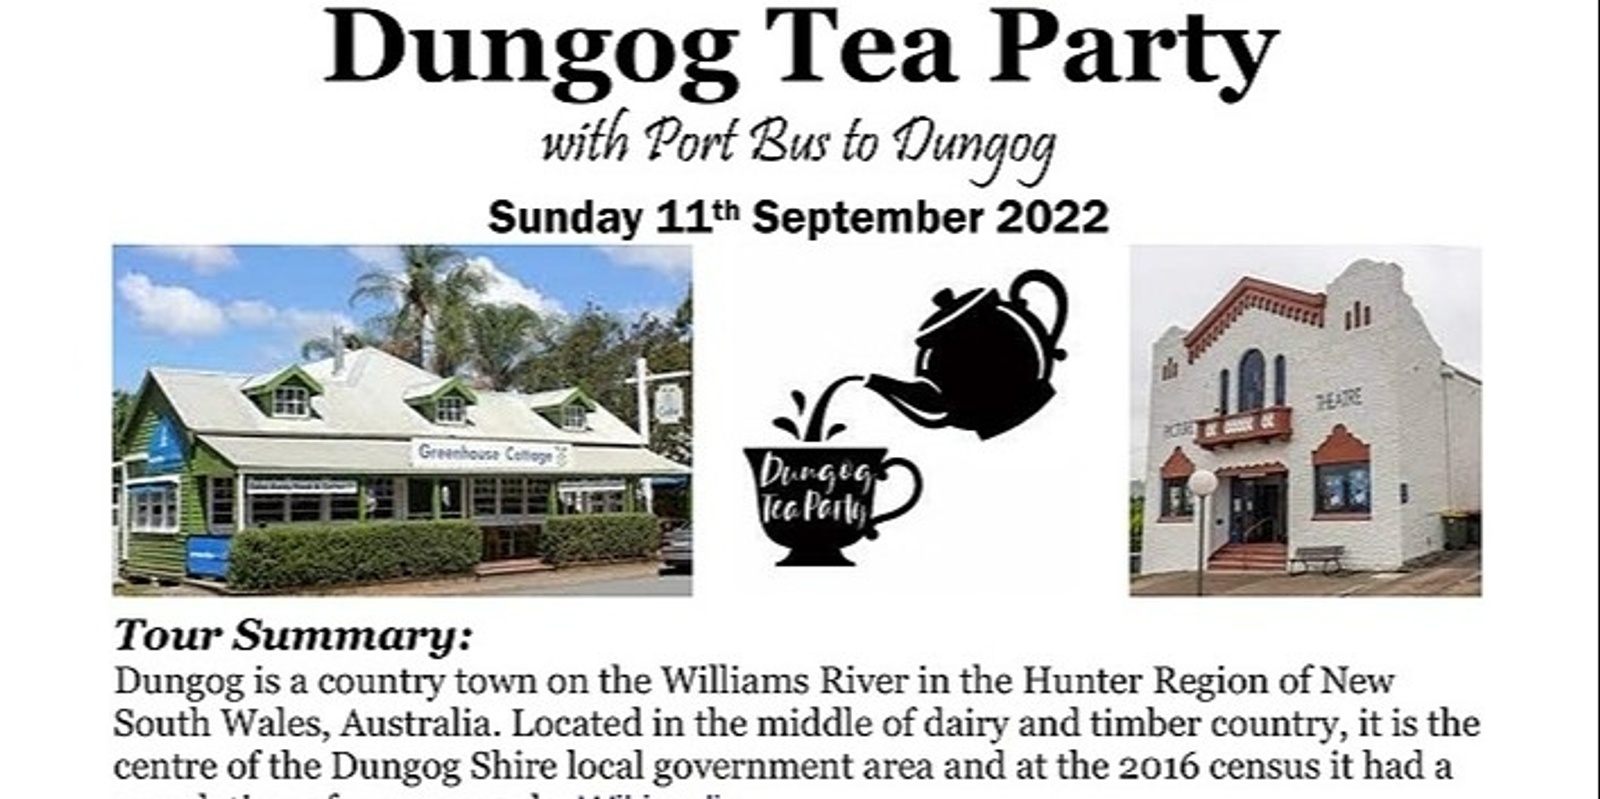 Banner image for Dungog Tea Party